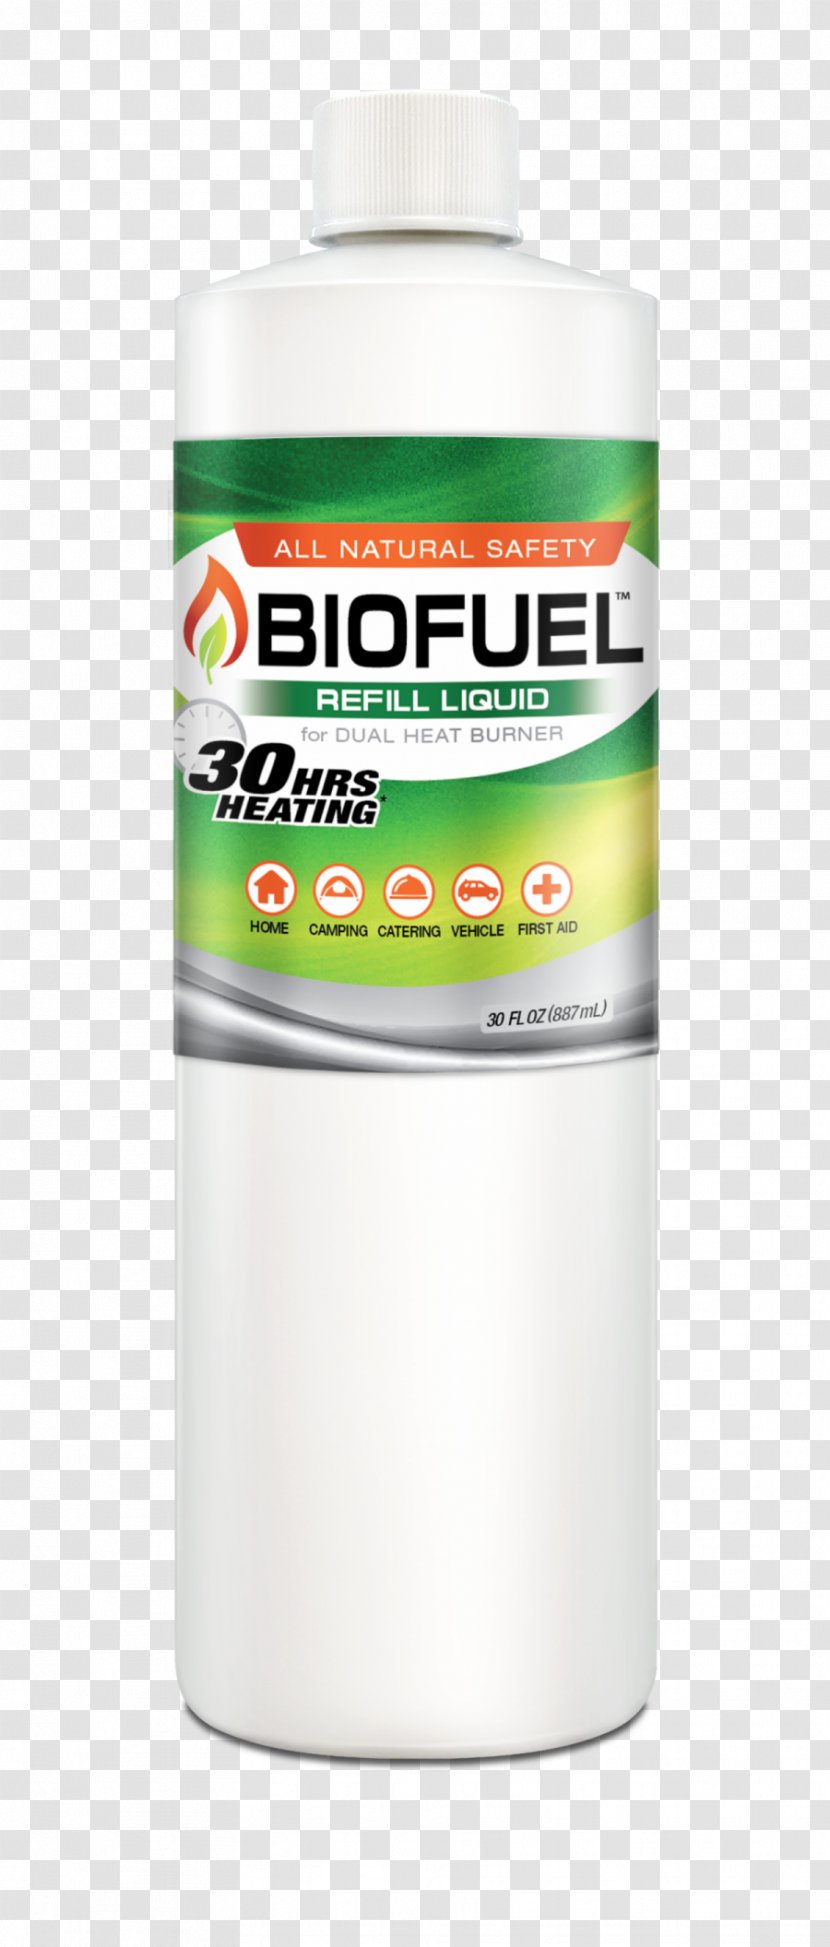 Water Product Design Solvent In Chemical Reactions BioFuel 440ml Bottle, Refill - Liquidm Transparent PNG